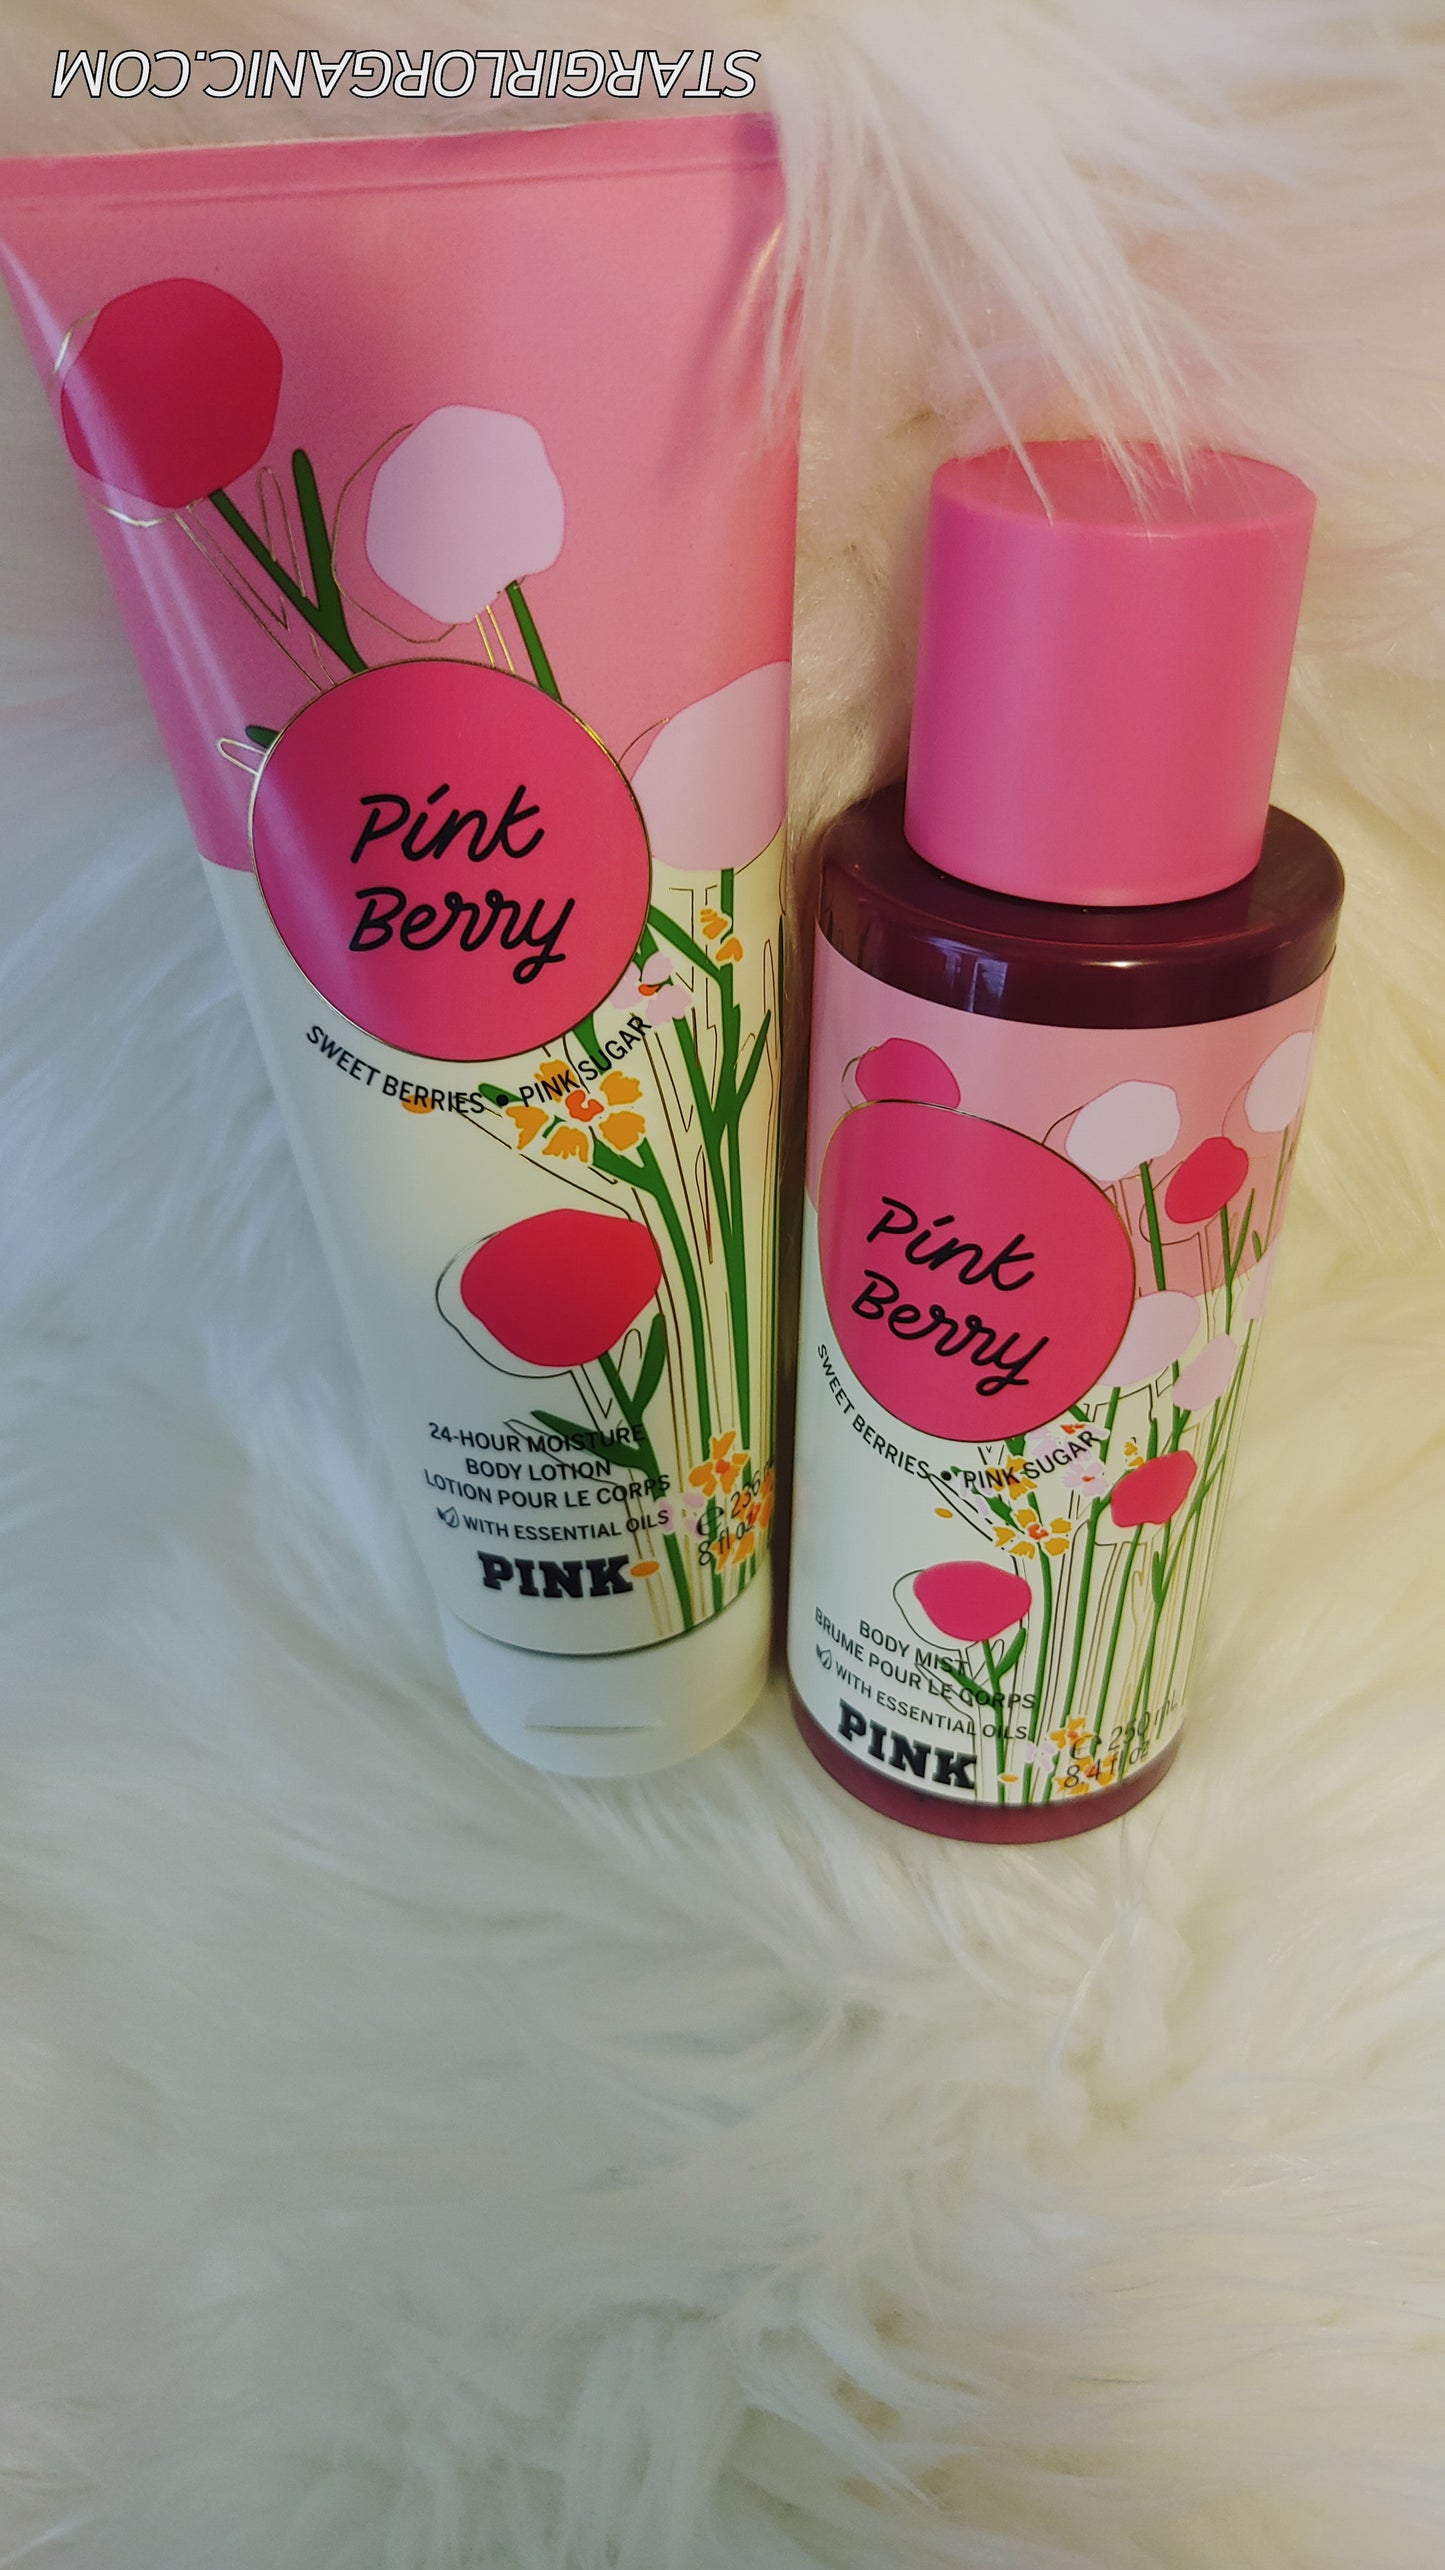 Victoria's Secret 2PC Pink Berry Pop Sweet Berries Pink Sugar Fragrance Mist and Body Lotion